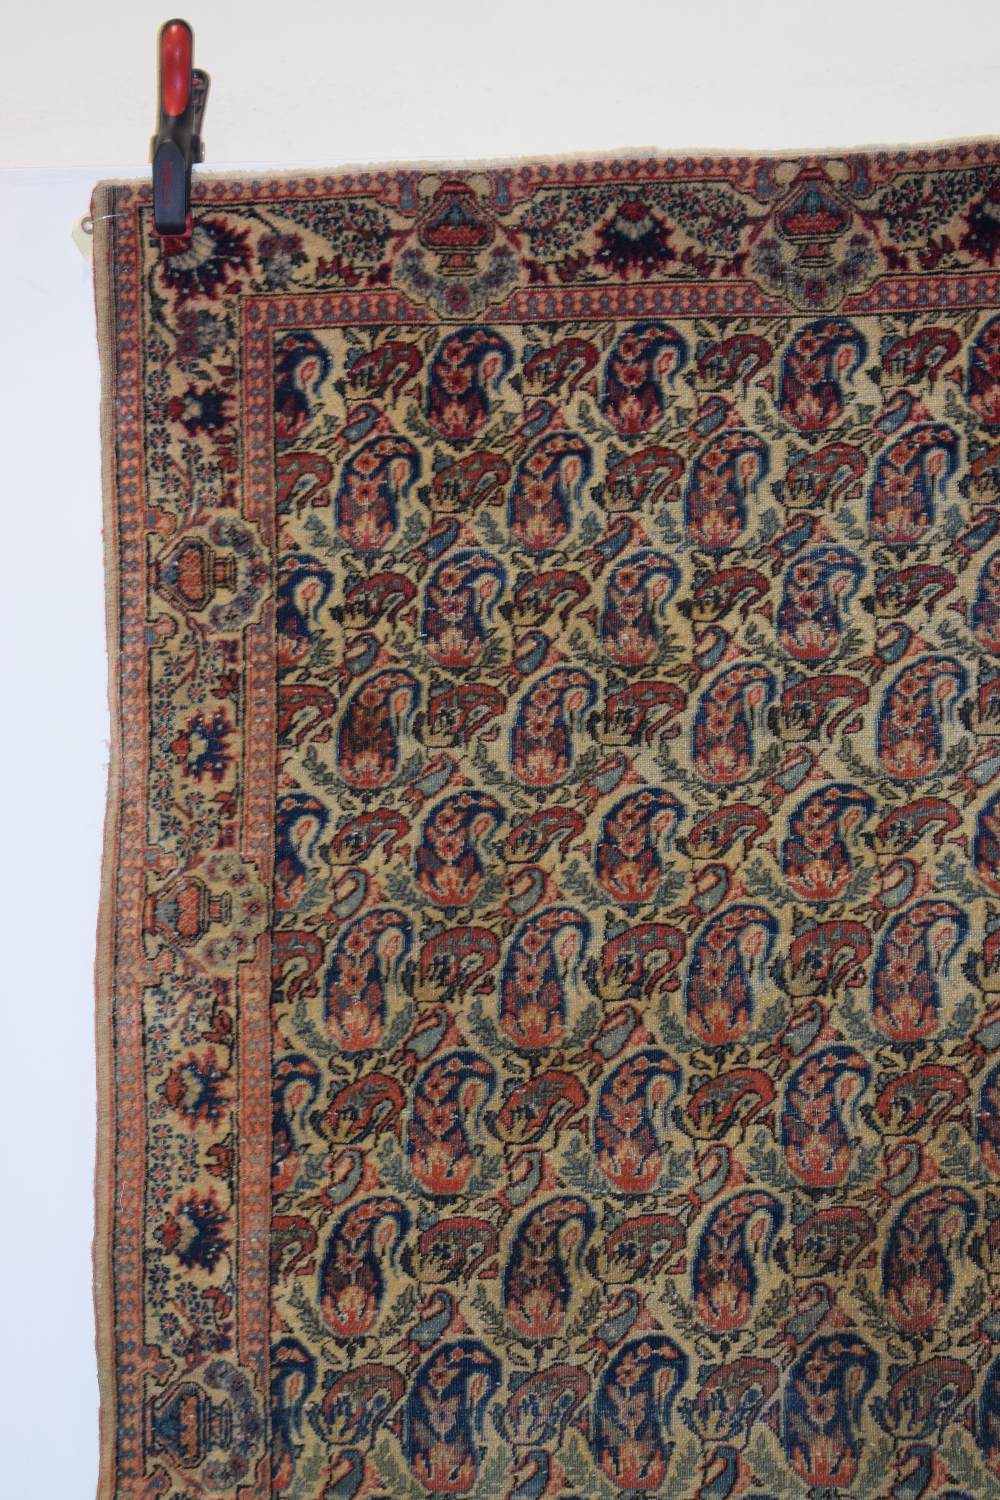 Kashan 'boteh' rug, west Persia, circa 1930s-40s, 4ft. 11in. X 3ft. 6in. 1.50m. X 1.07m. Overall - Image 4 of 10